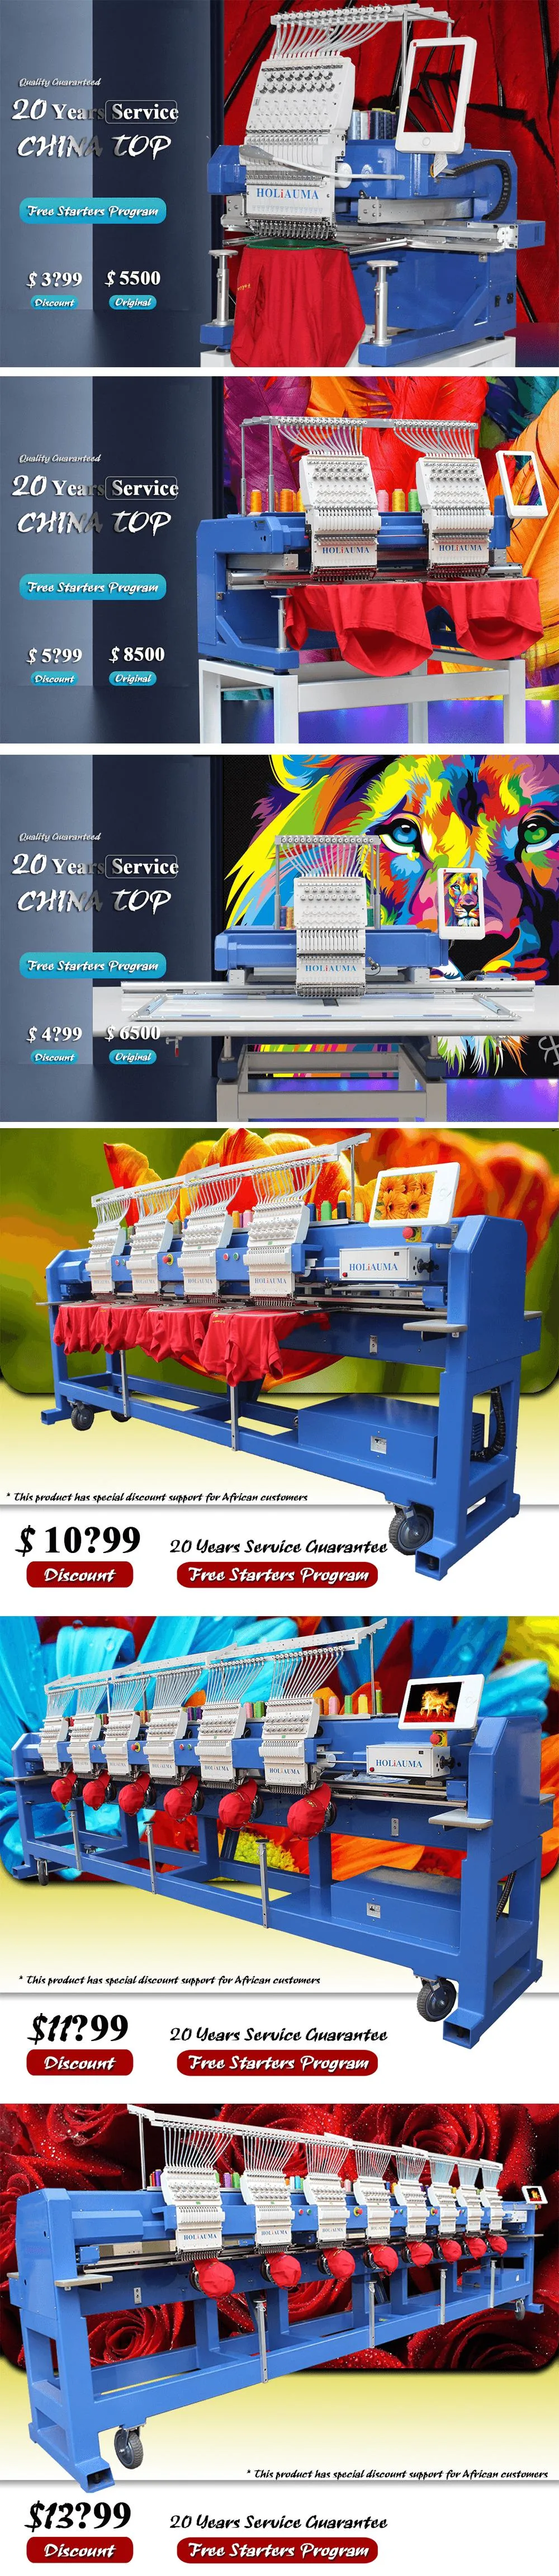 5 Years Warranty! ! ! Multihead Computer Automatic Sewing Embroidery Machine Max Speed 1000 Rpm Brother Pr 600 Embroidery Machine